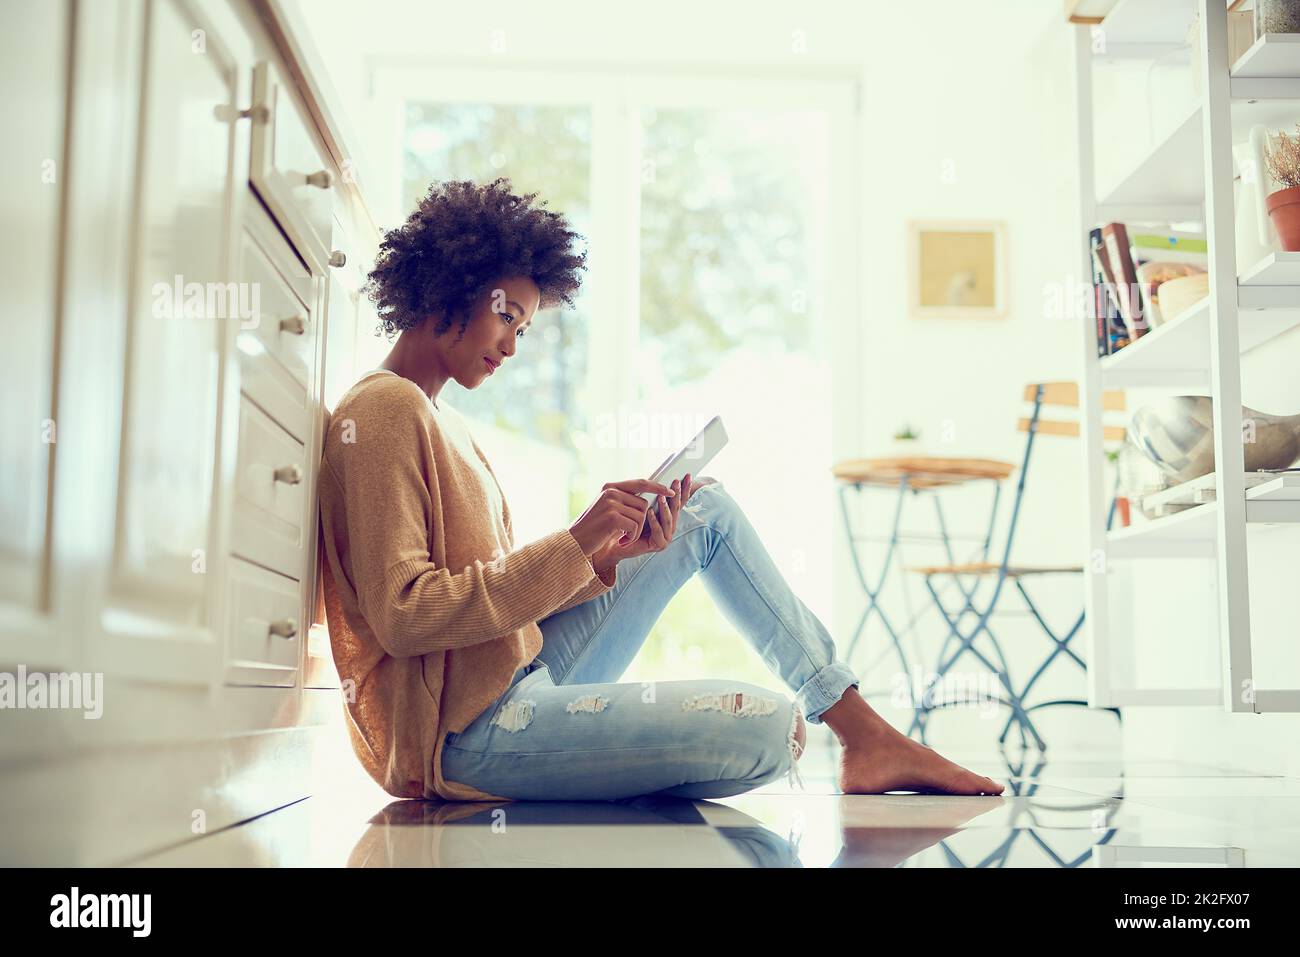 Getting stuck into that ebook shes been wanting to read. Shot of a young woman using a digital tablet at home. Stock Photo